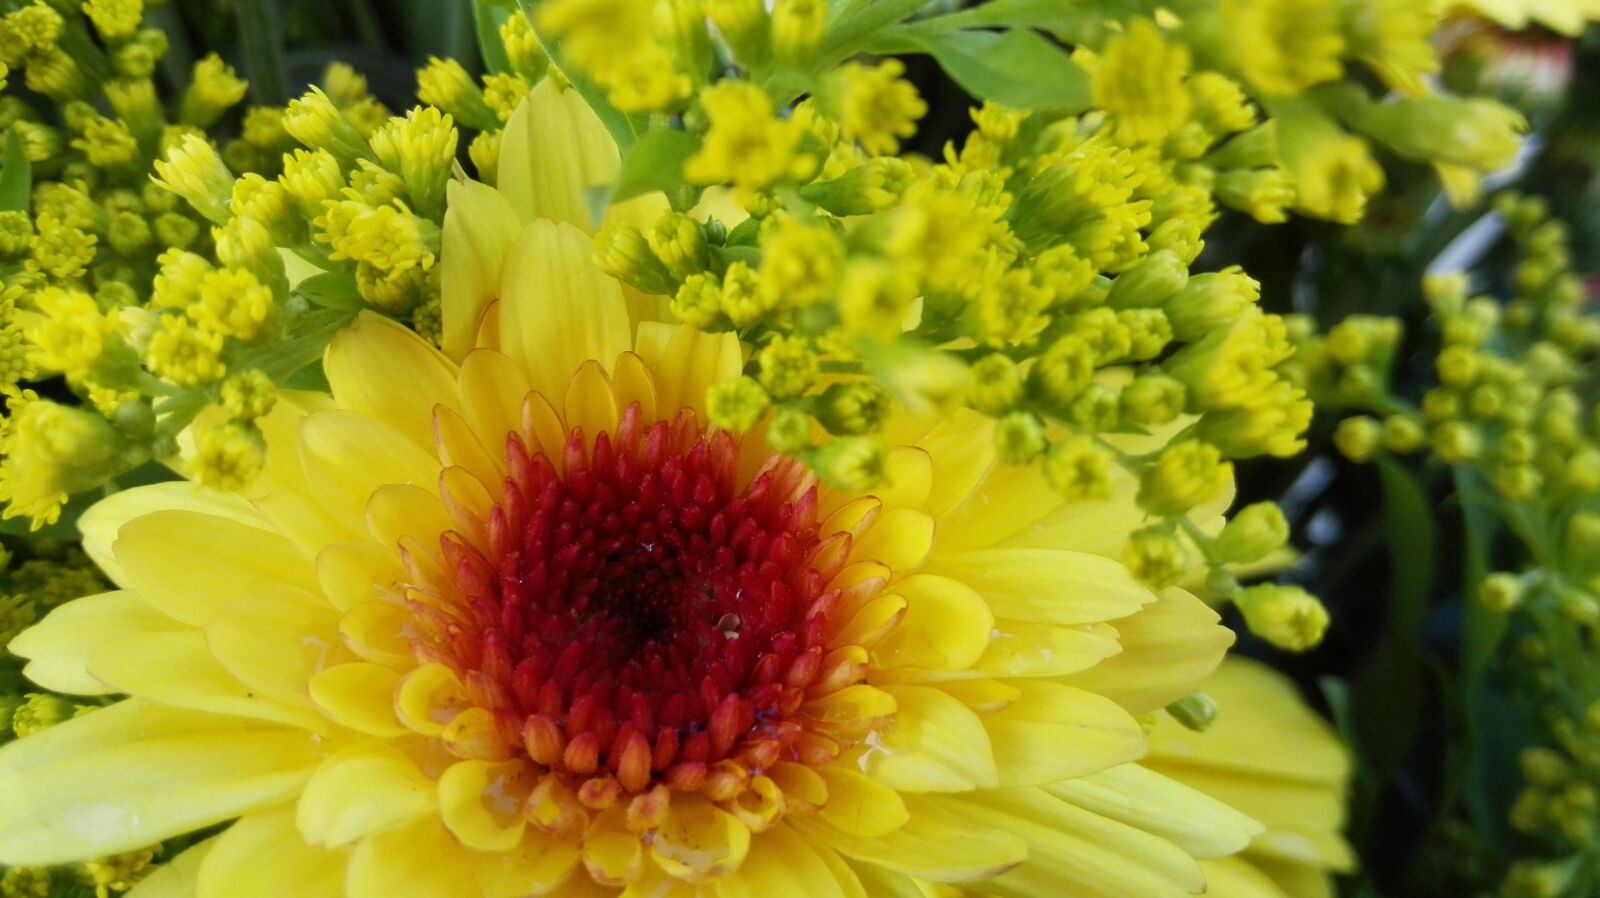 HUAWEI P7-L10 sample photo. Flower, yellow, nature photography